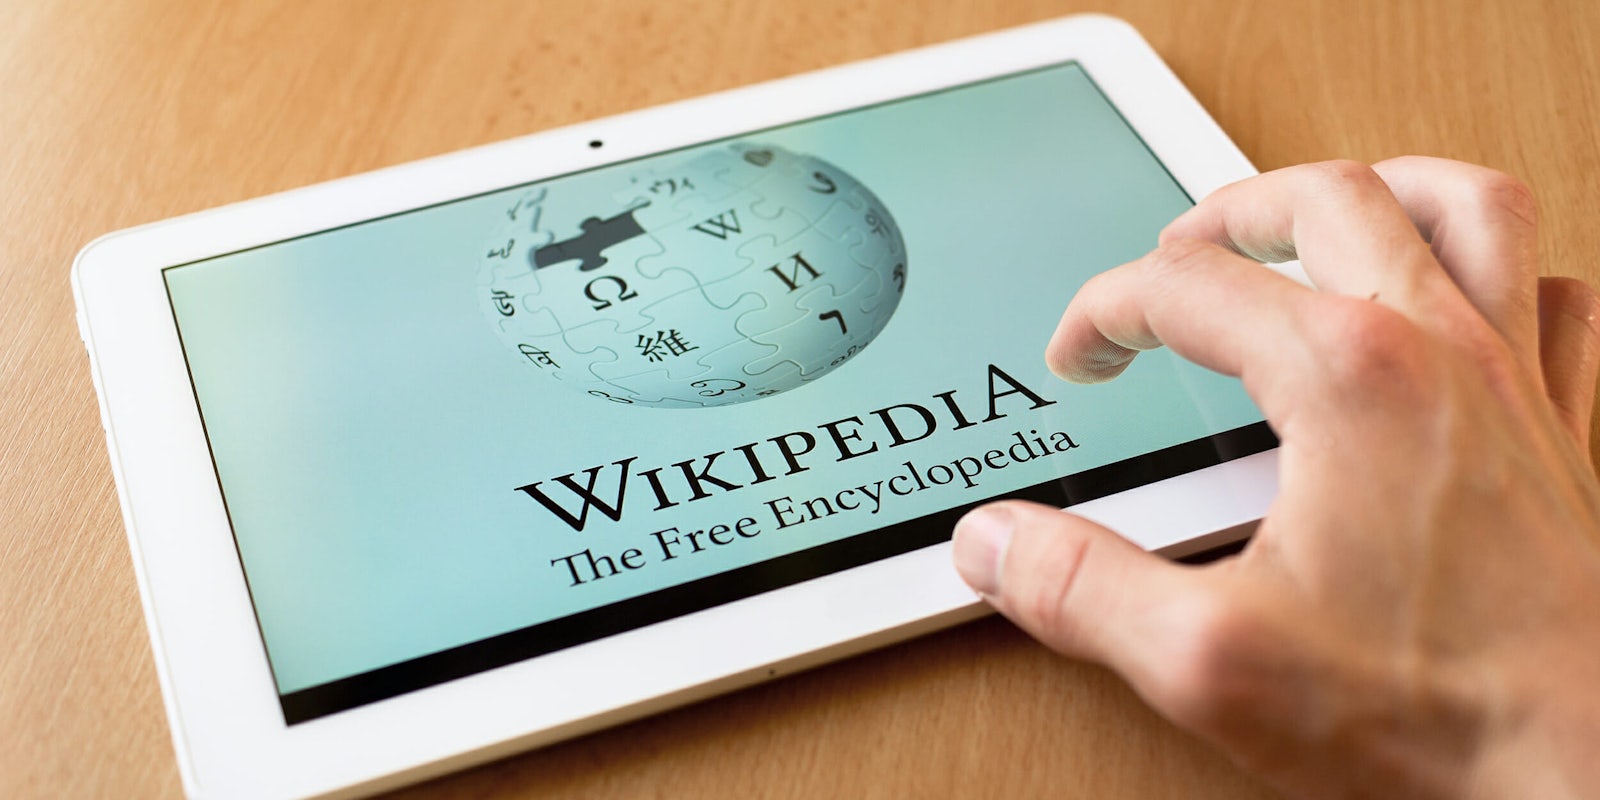 wikipedia on tablet